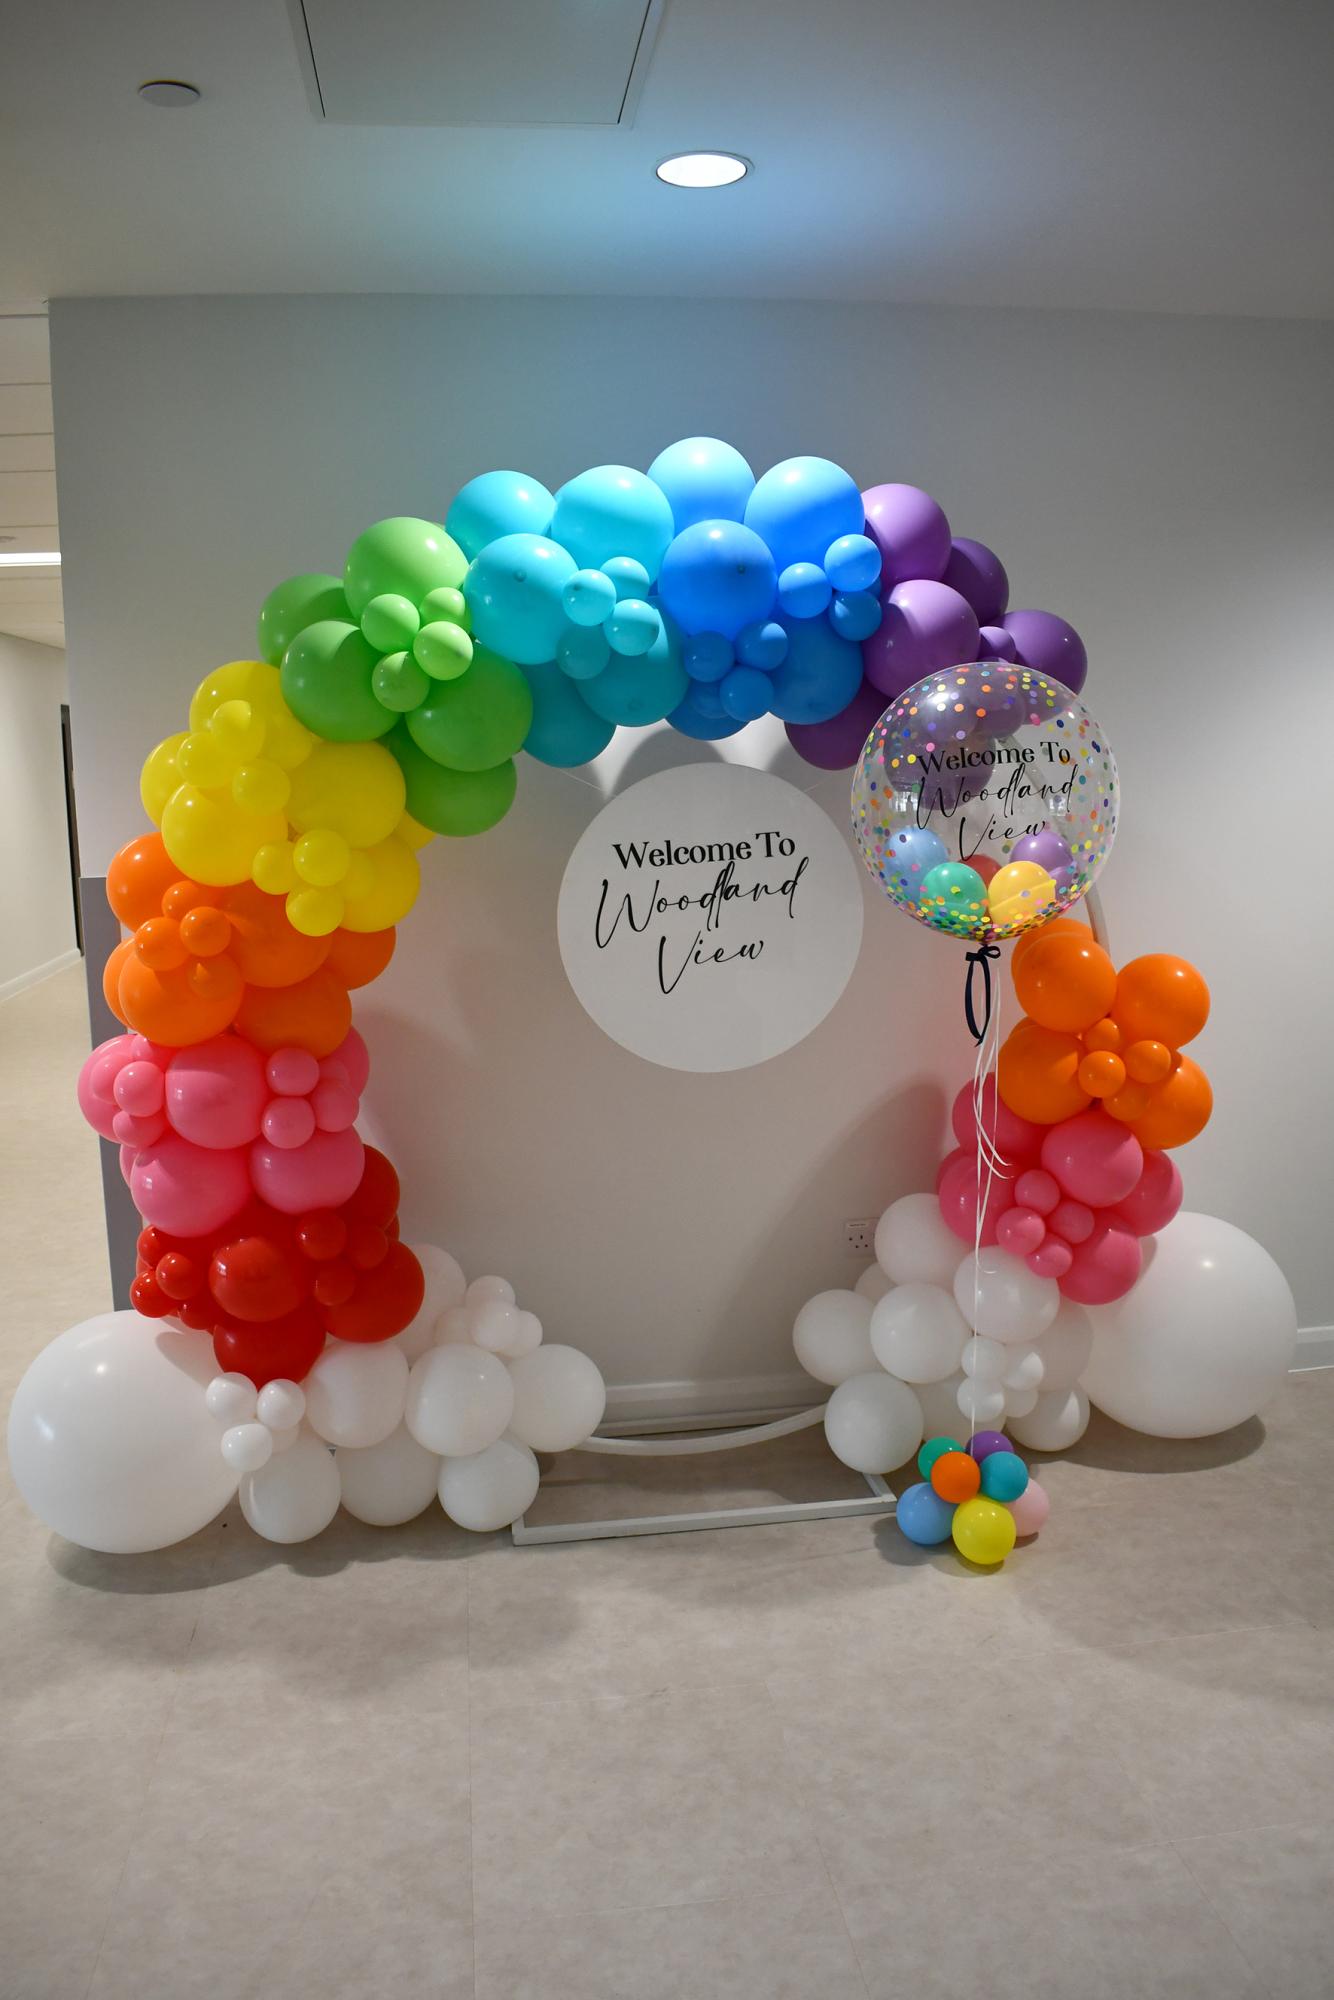 Opening Day Balloons with the words 'Welcome to Woodland View'